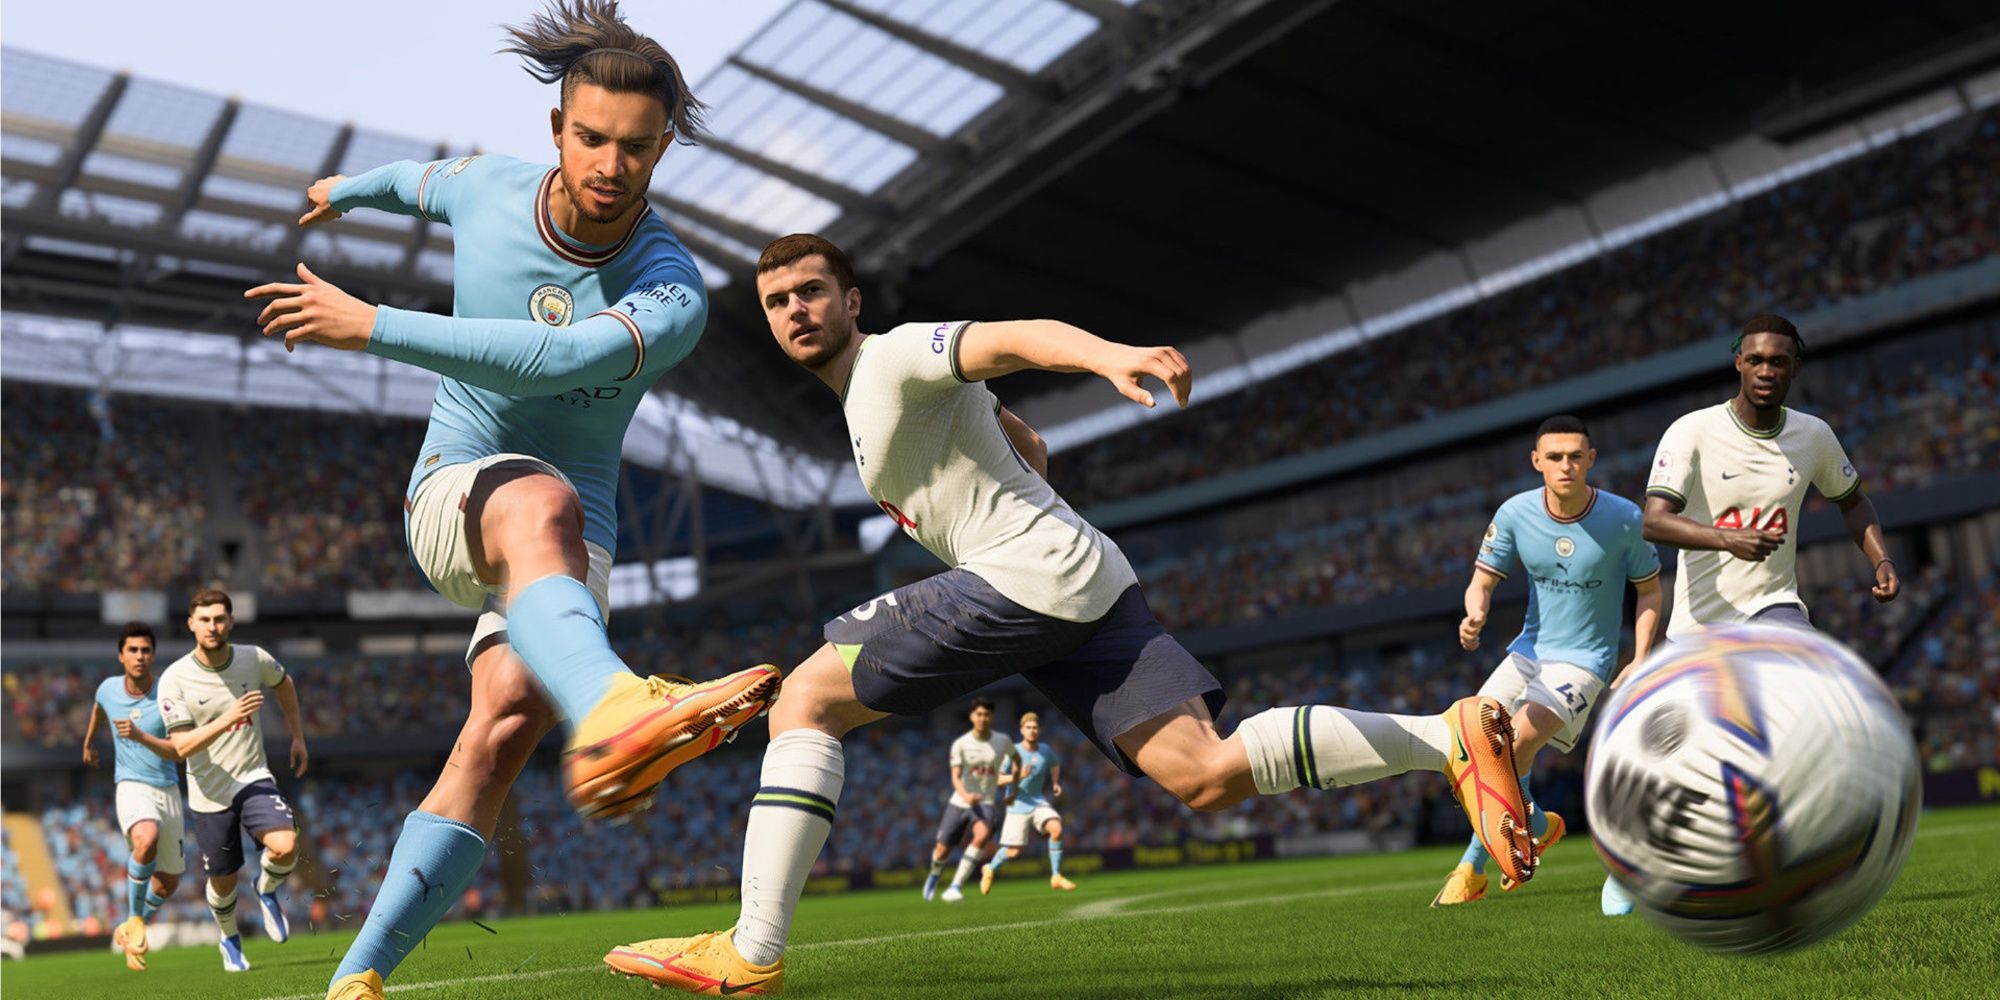 Jack Grealish takes a Power Shot in FIFA 23.